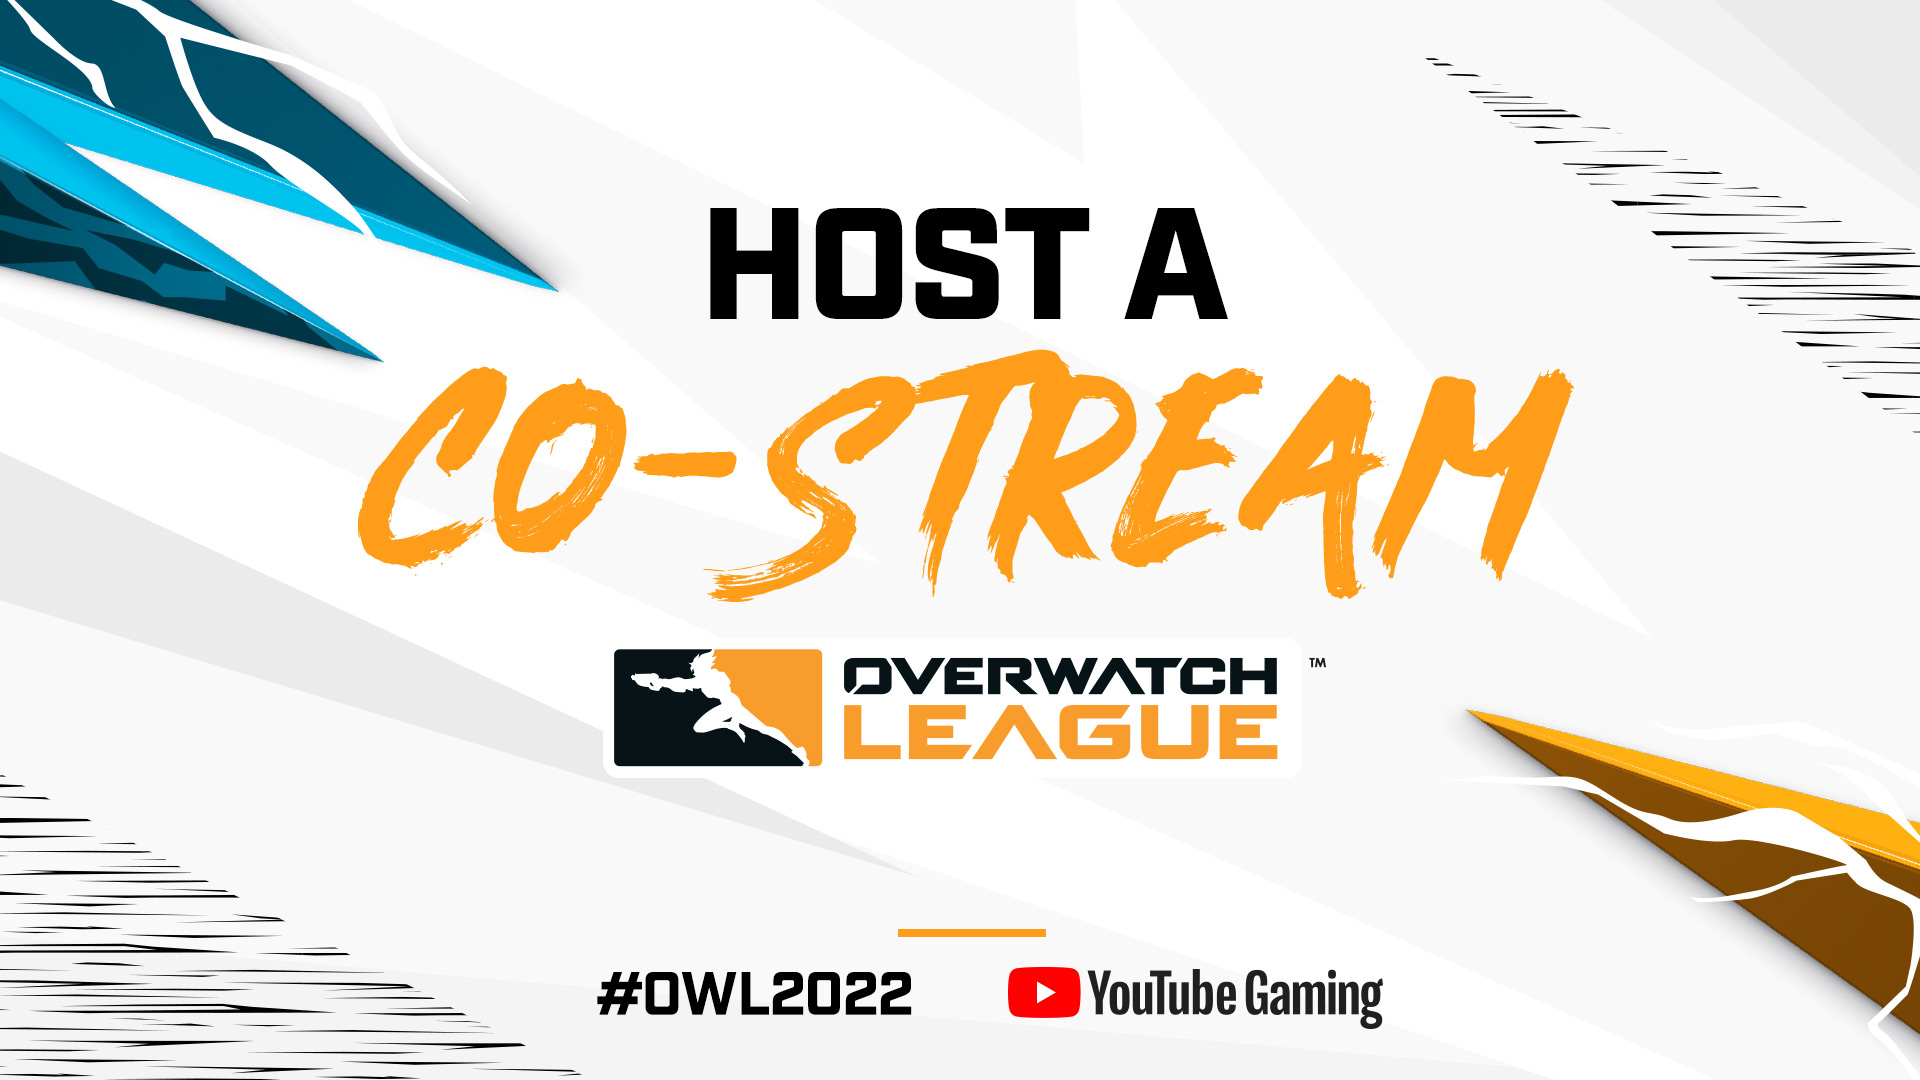 2022 Overwatch League Community Co-streaming The Overwatch League